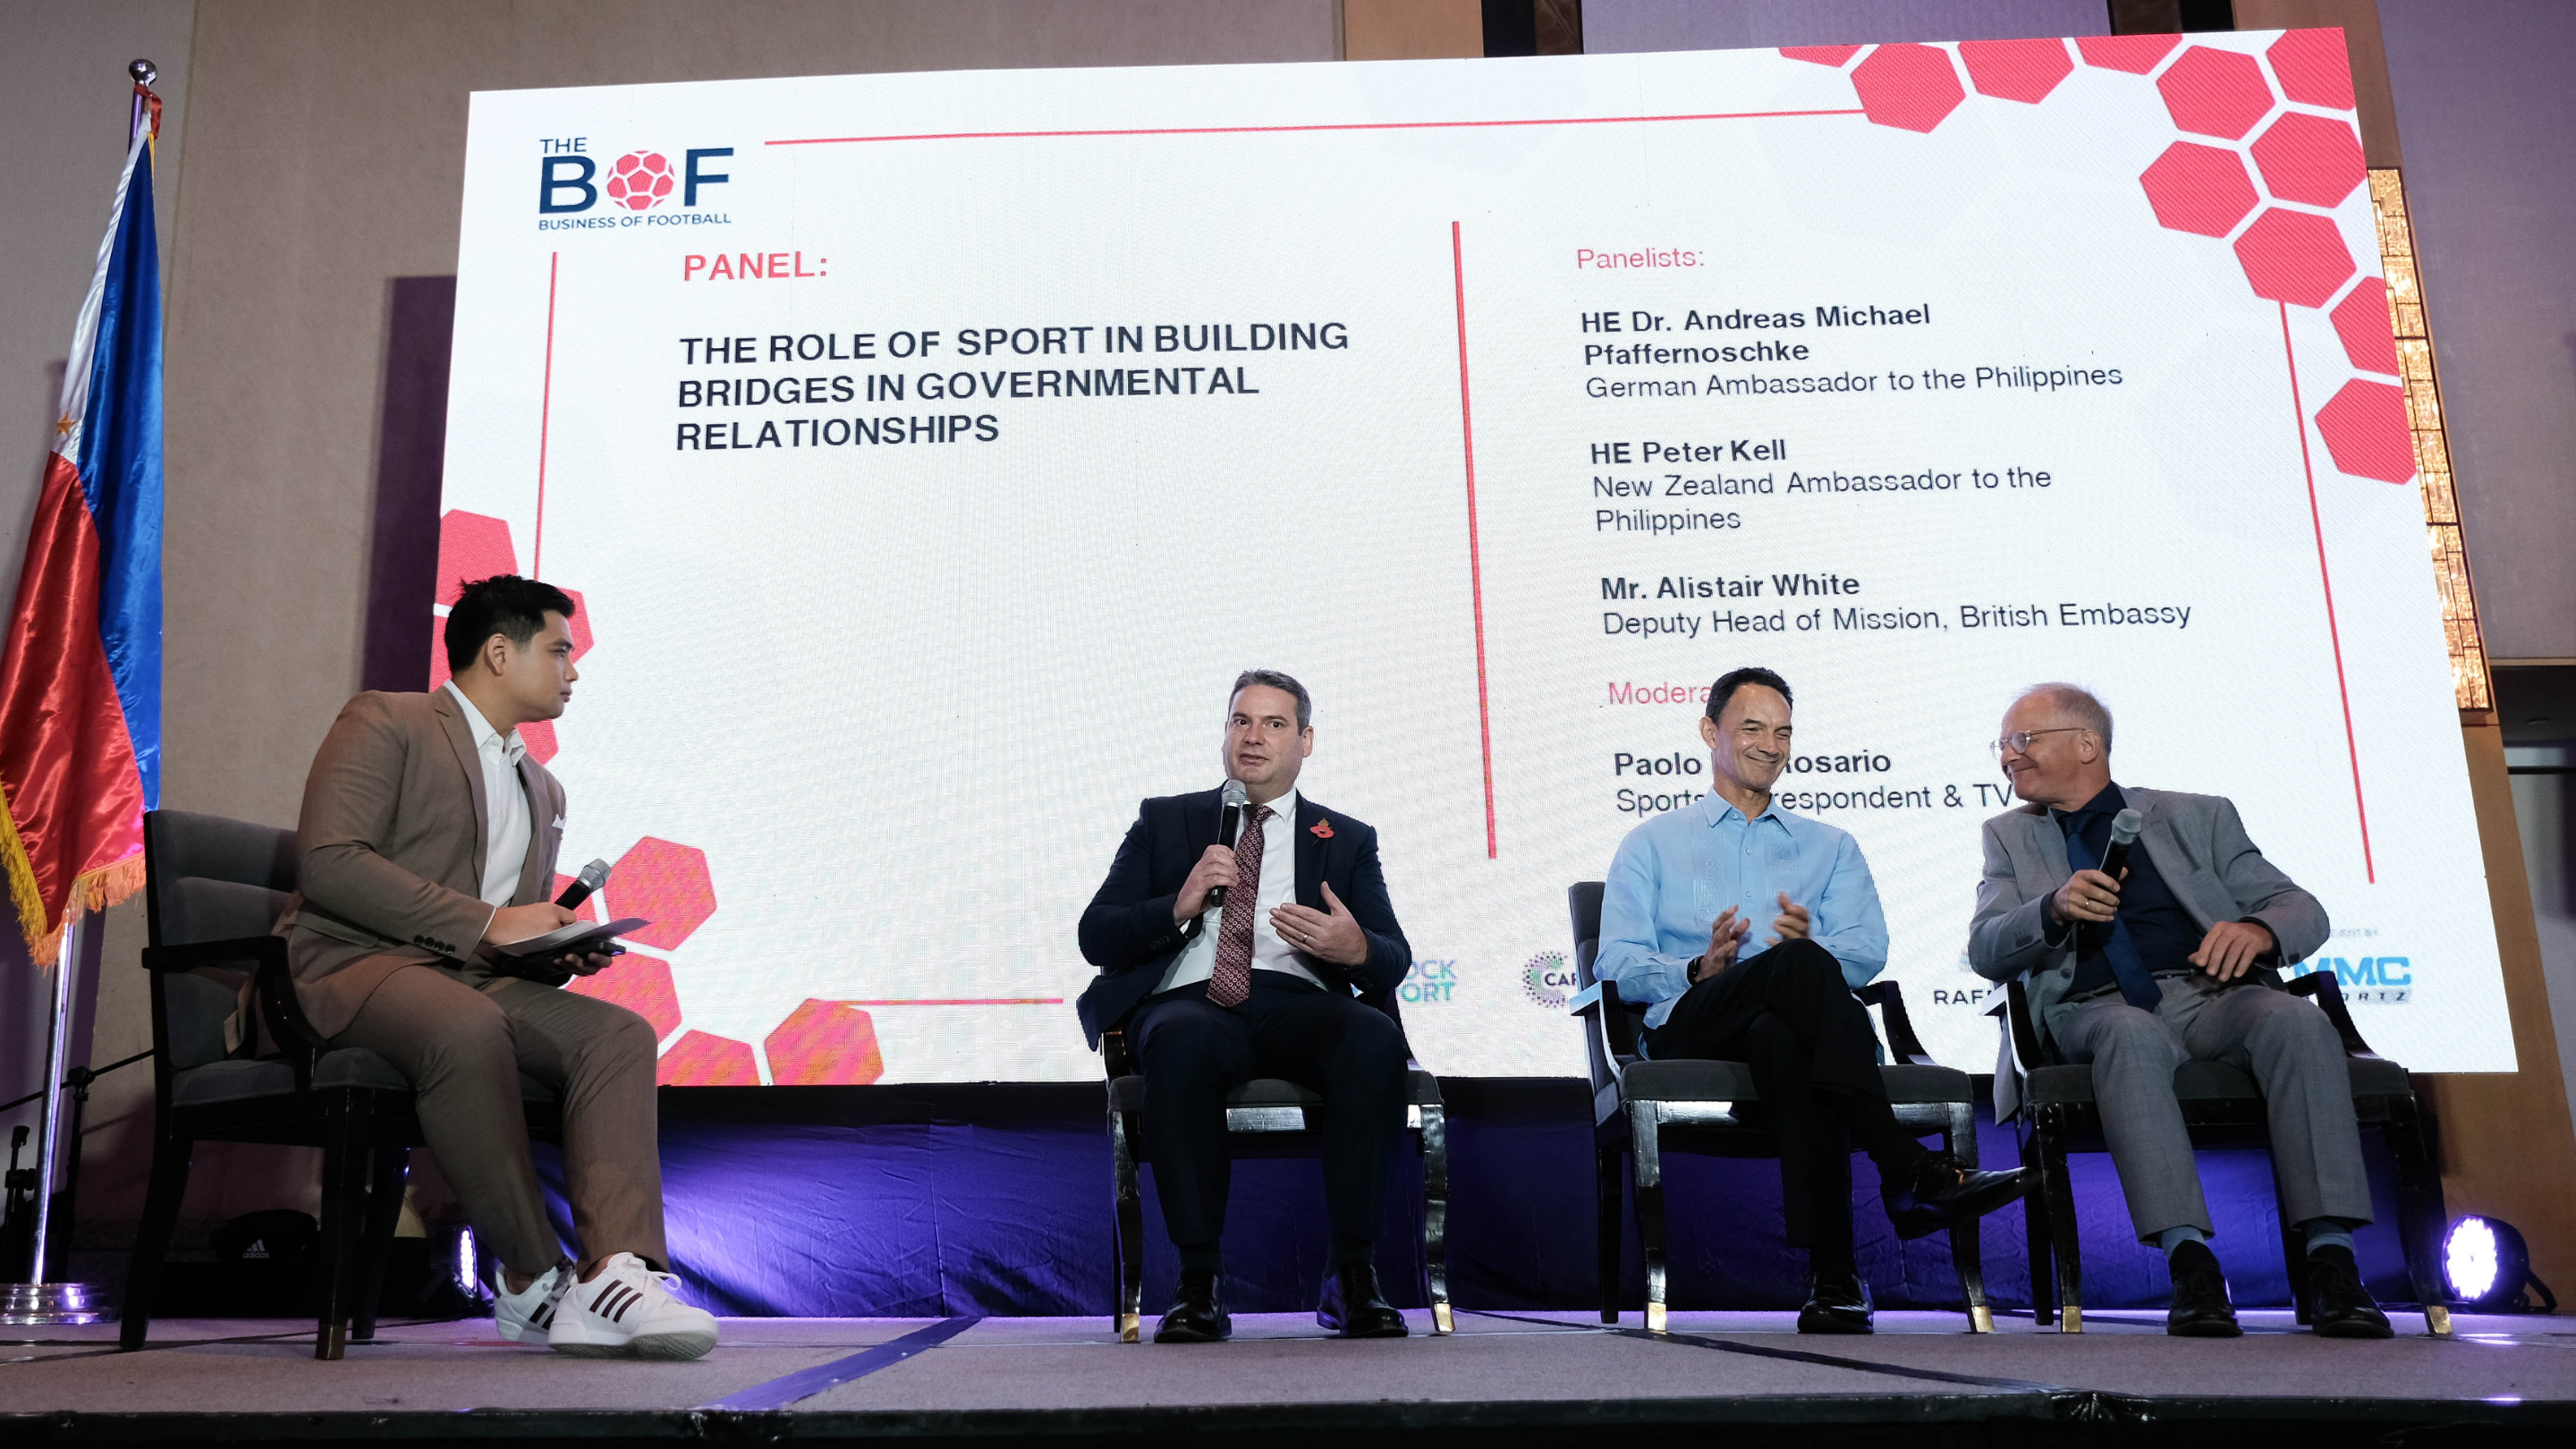 L-R : Panel of The Role of Sport Building Bridges in Governmental Relationships with Paolo Del Rosario - Moderator, Mr. Alistair White - Deputy Head of Mission, British Embassy; Mr. Peter Kell - New Zealand Ambassador to the Philippines; HE Dr. Andreas Pfaffernoschke, German Ambassador to the Philippines